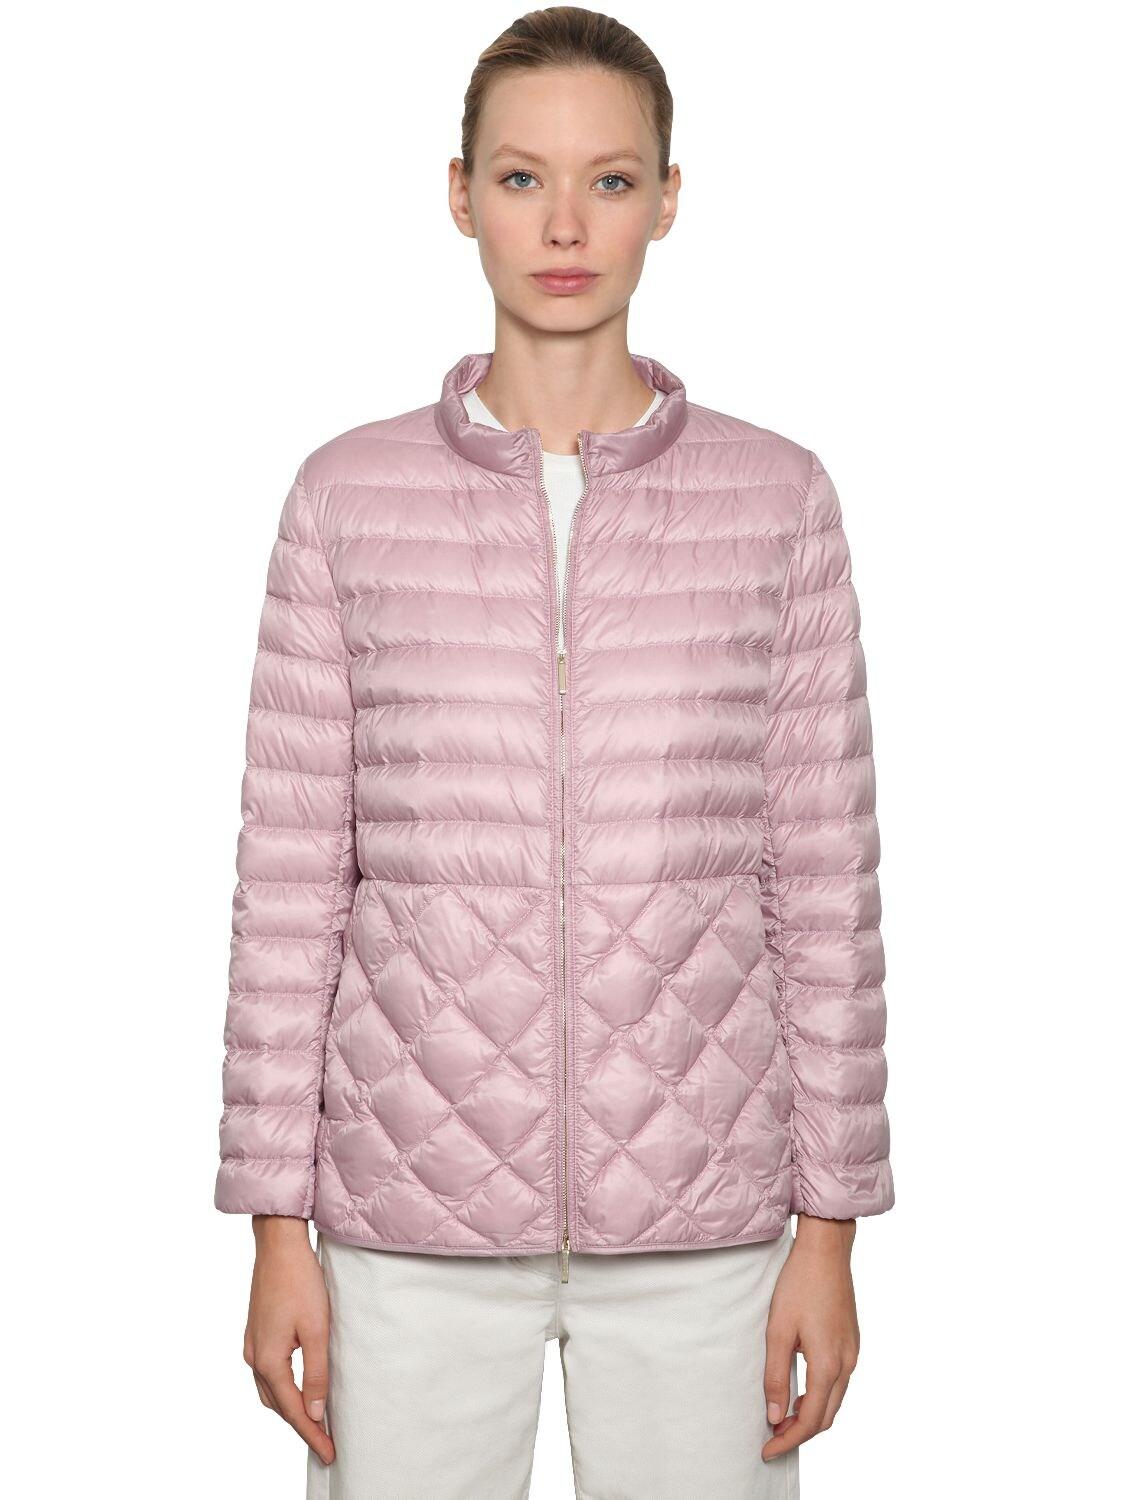 Max Mara Synthetic Quilted Nylon Down Jacket in Pink - Lyst